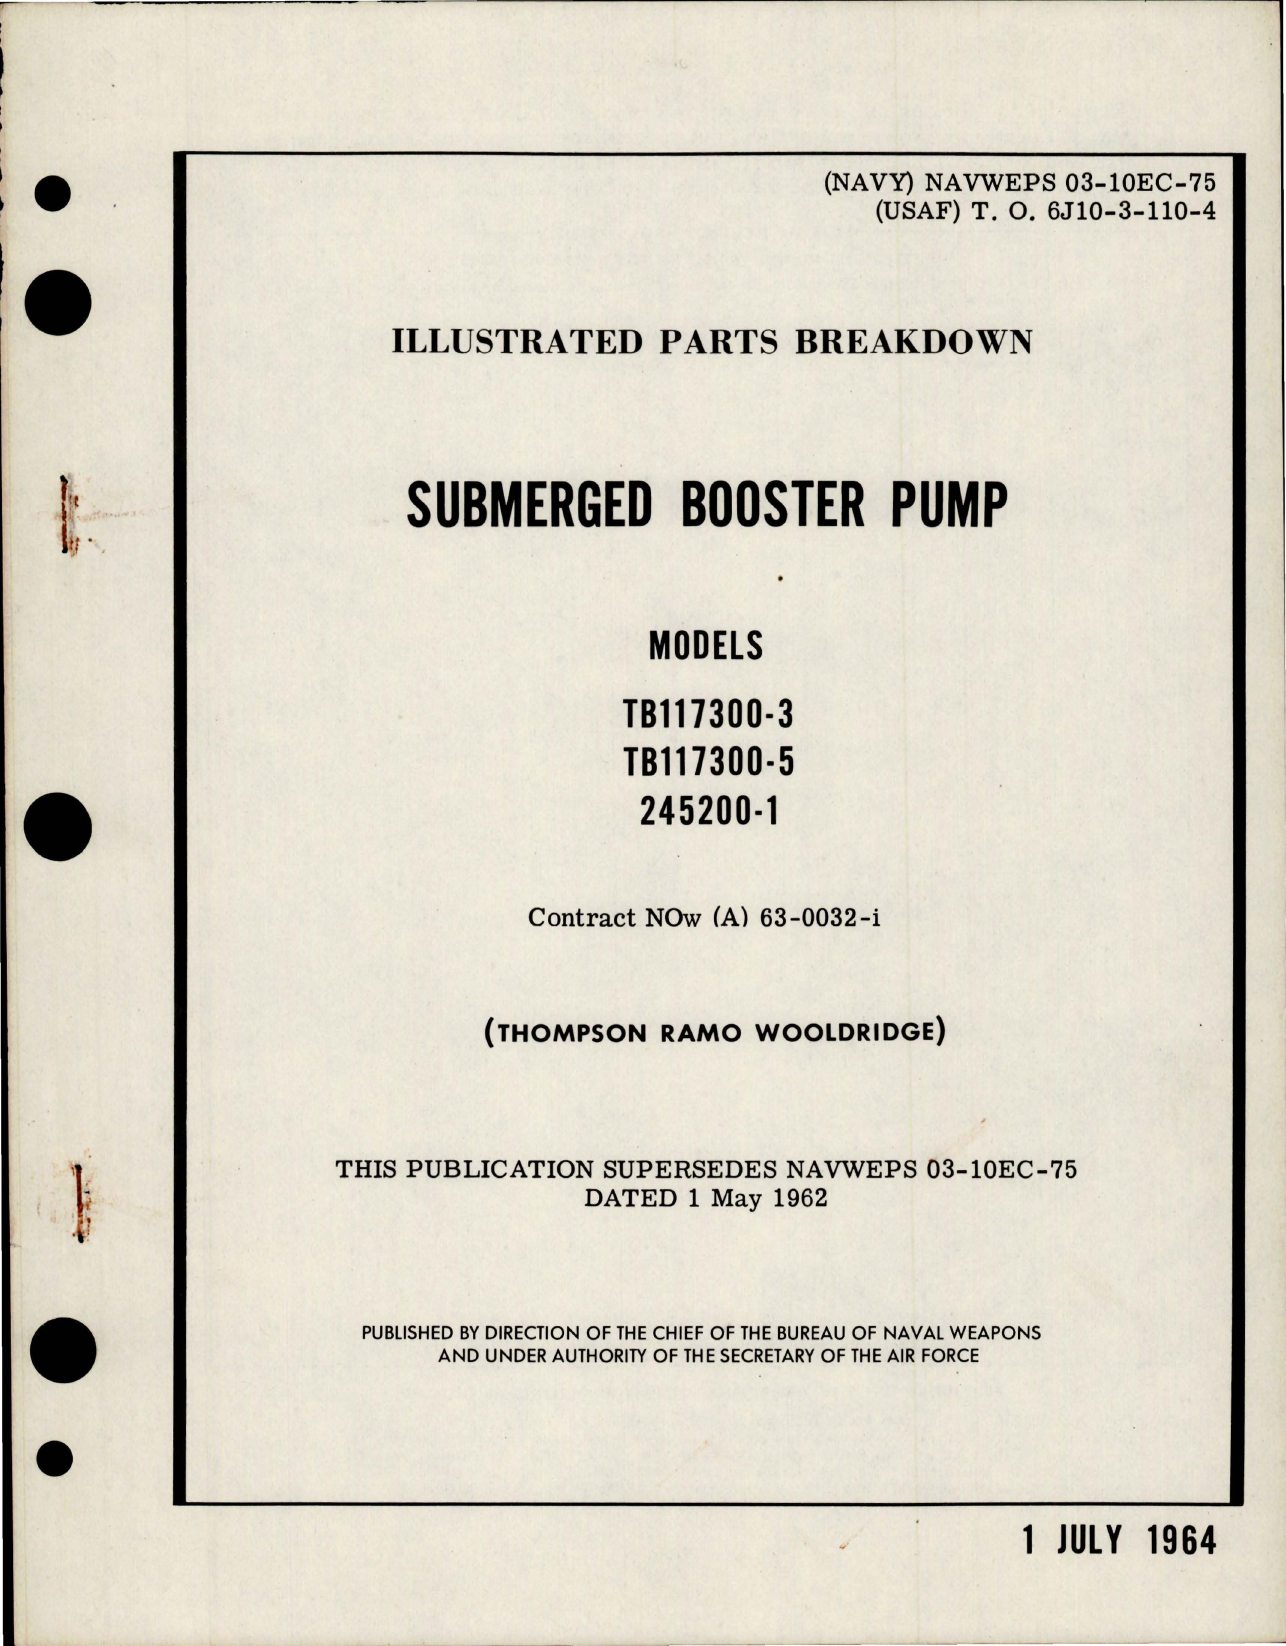 Sample page 1 from AirCorps Library document: Illustrated Parts Breakdown for Submerged Booster Pump - Models TB117300-3, TB117300-5, 245200-1 